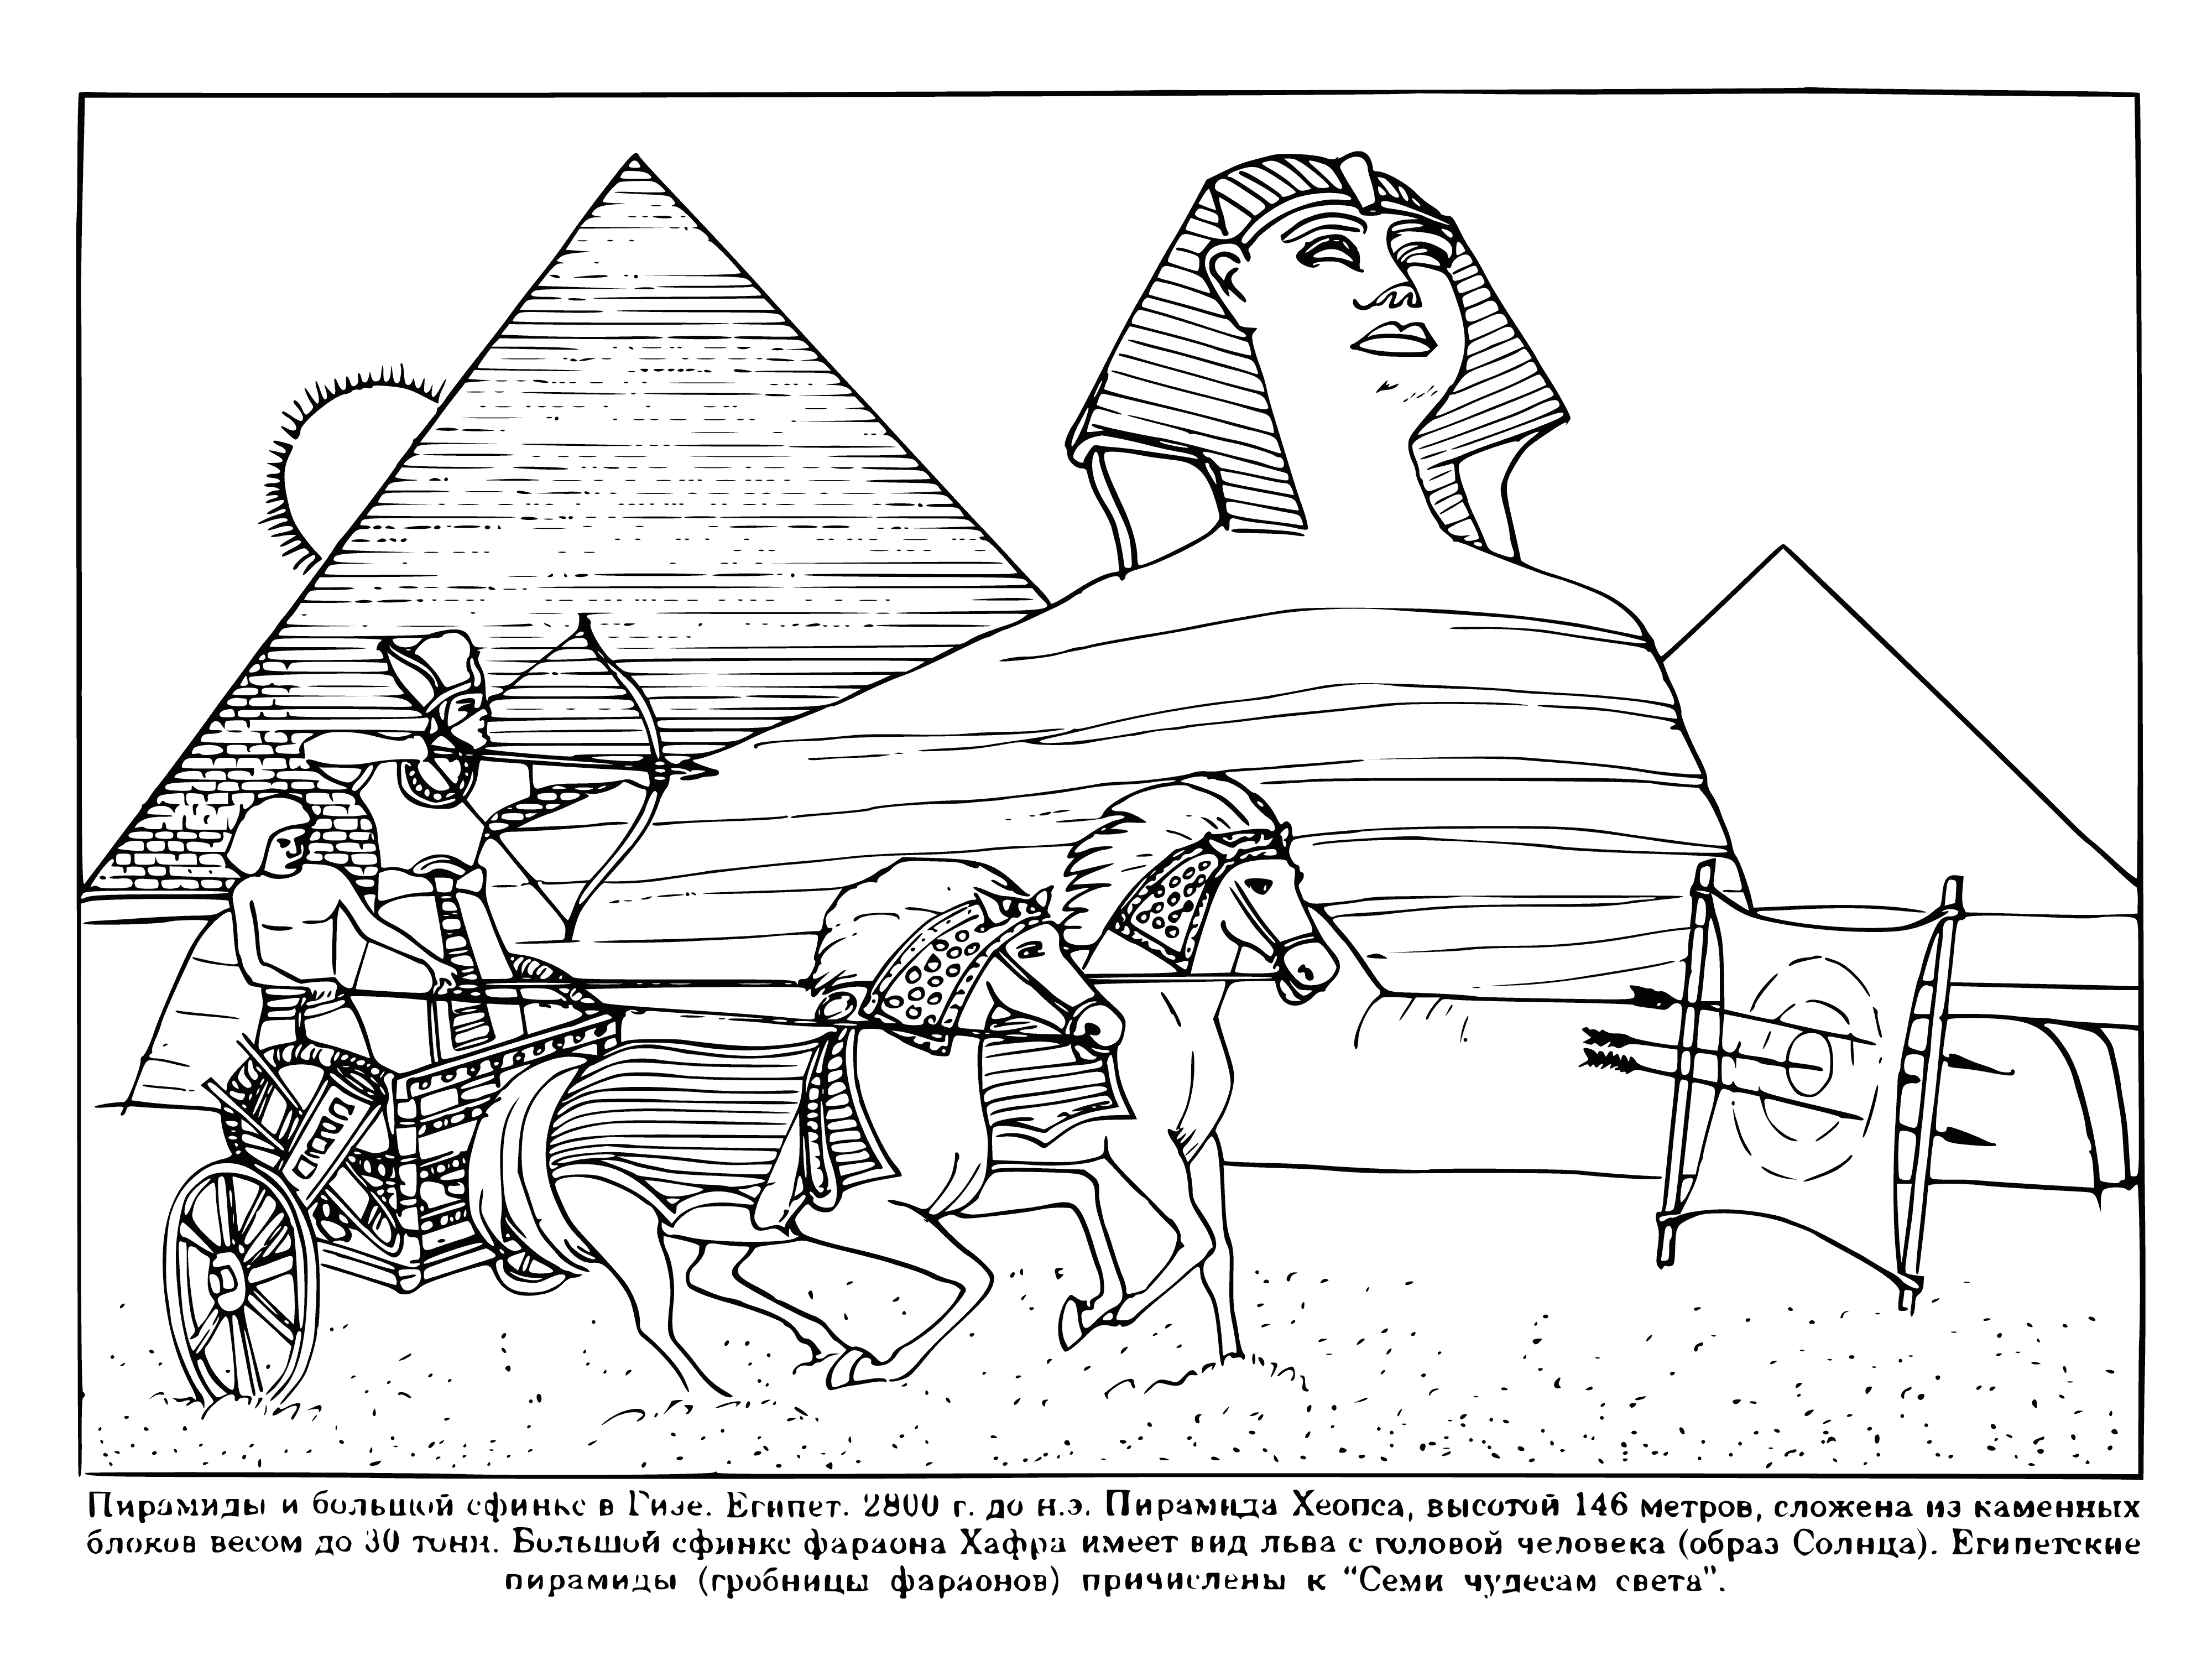 coloring page: The Egyptian pyramids were built over 4000 years ago, and the Great Pyramid of Giza is the largest and oldest of them all. It is an impressive 145 metres high and is made of huge limestone blocks (up to 2.5 tonnes).